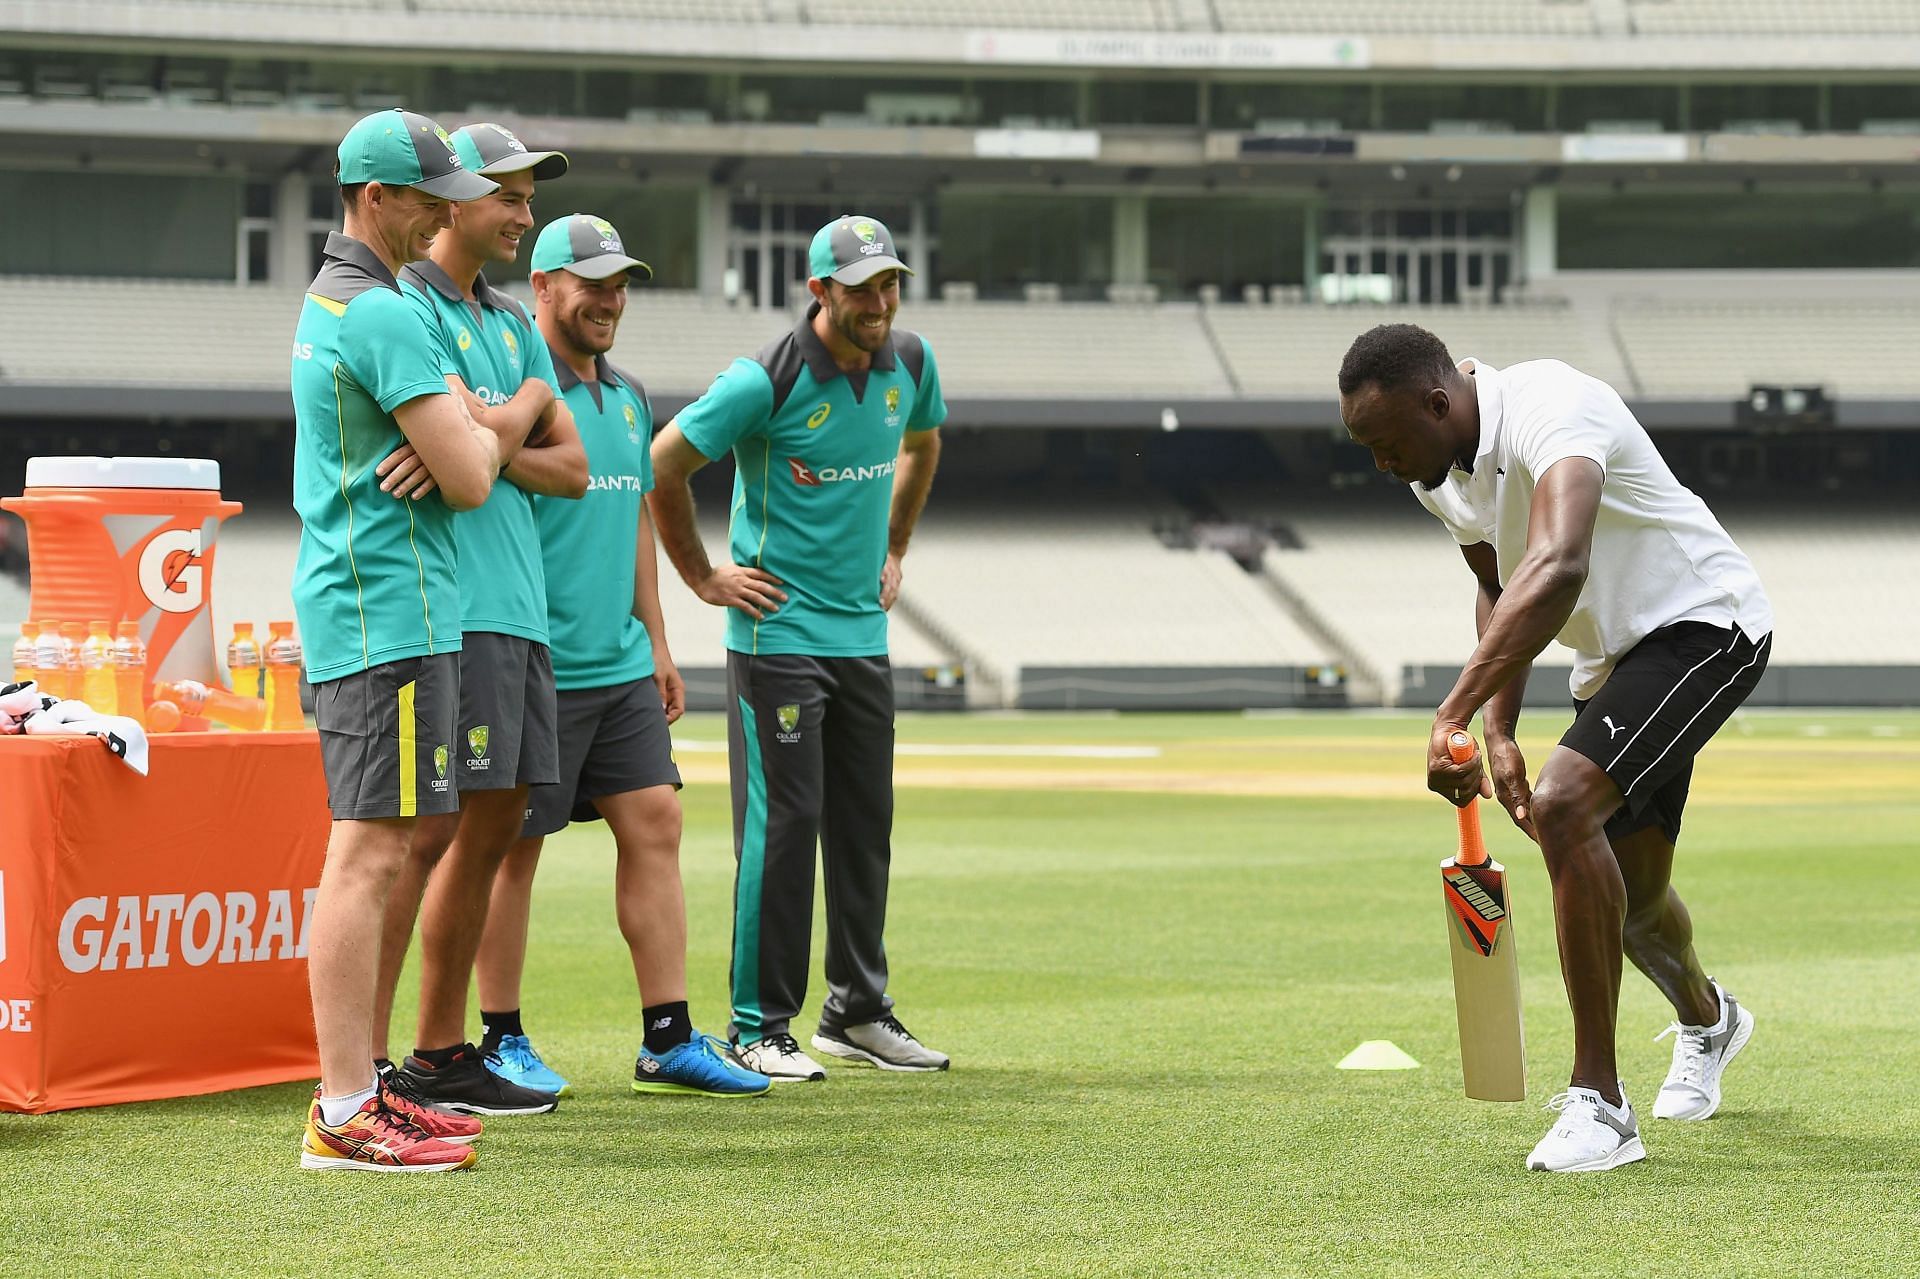 Usain Bolt (R) coaches Australian cricketers Glenn Maxwell, Ashton Agar, Peter Handscomb and Aaron Finch during the Gatorade Fastest Run at the Melbourne Cricket Ground on November 10, 2017 in Melbourne, Australia. (Photo by Quinn Rooney/Getty Images for Gatorade)